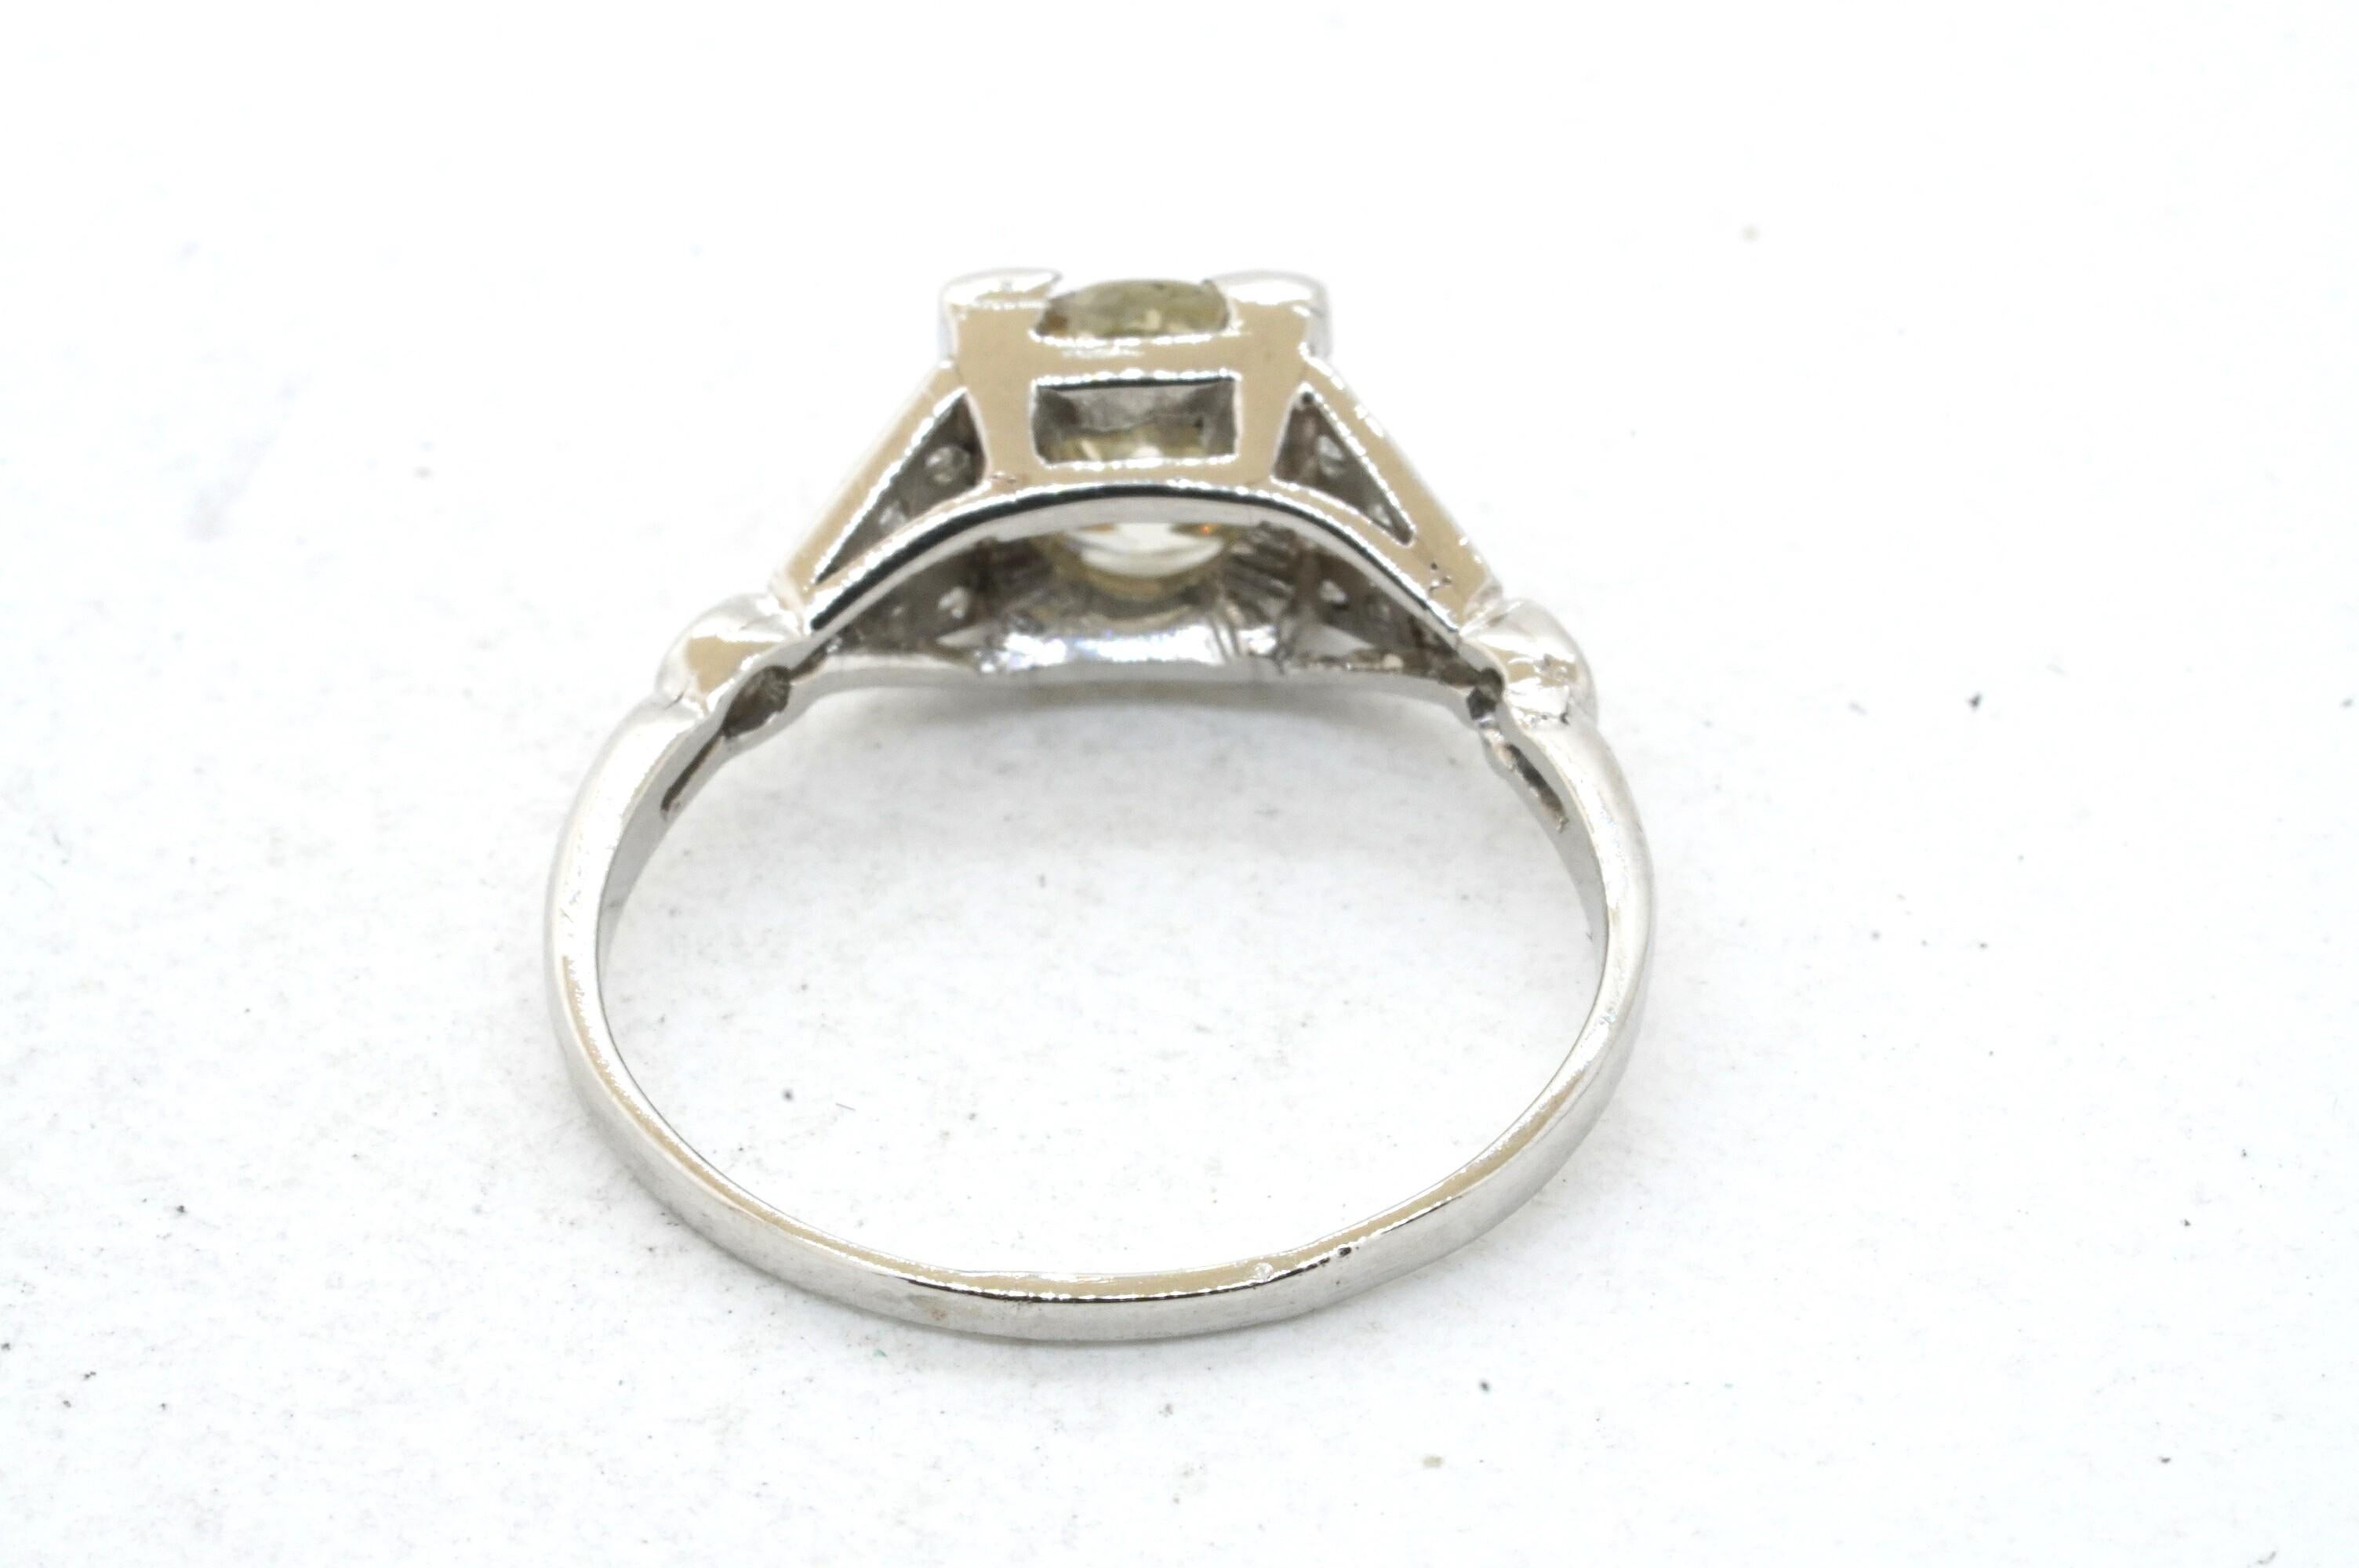 Antique Platinum 1.10CT diamond cocktail ring w/ 0.93CT center sz. 5.5. This outstanding piece of jewelry is crafted in gorgeous Platinum and features 13 diamonds with a combined weight of approx. 1.05CT. This includes an approx. 0.93CT Round cut